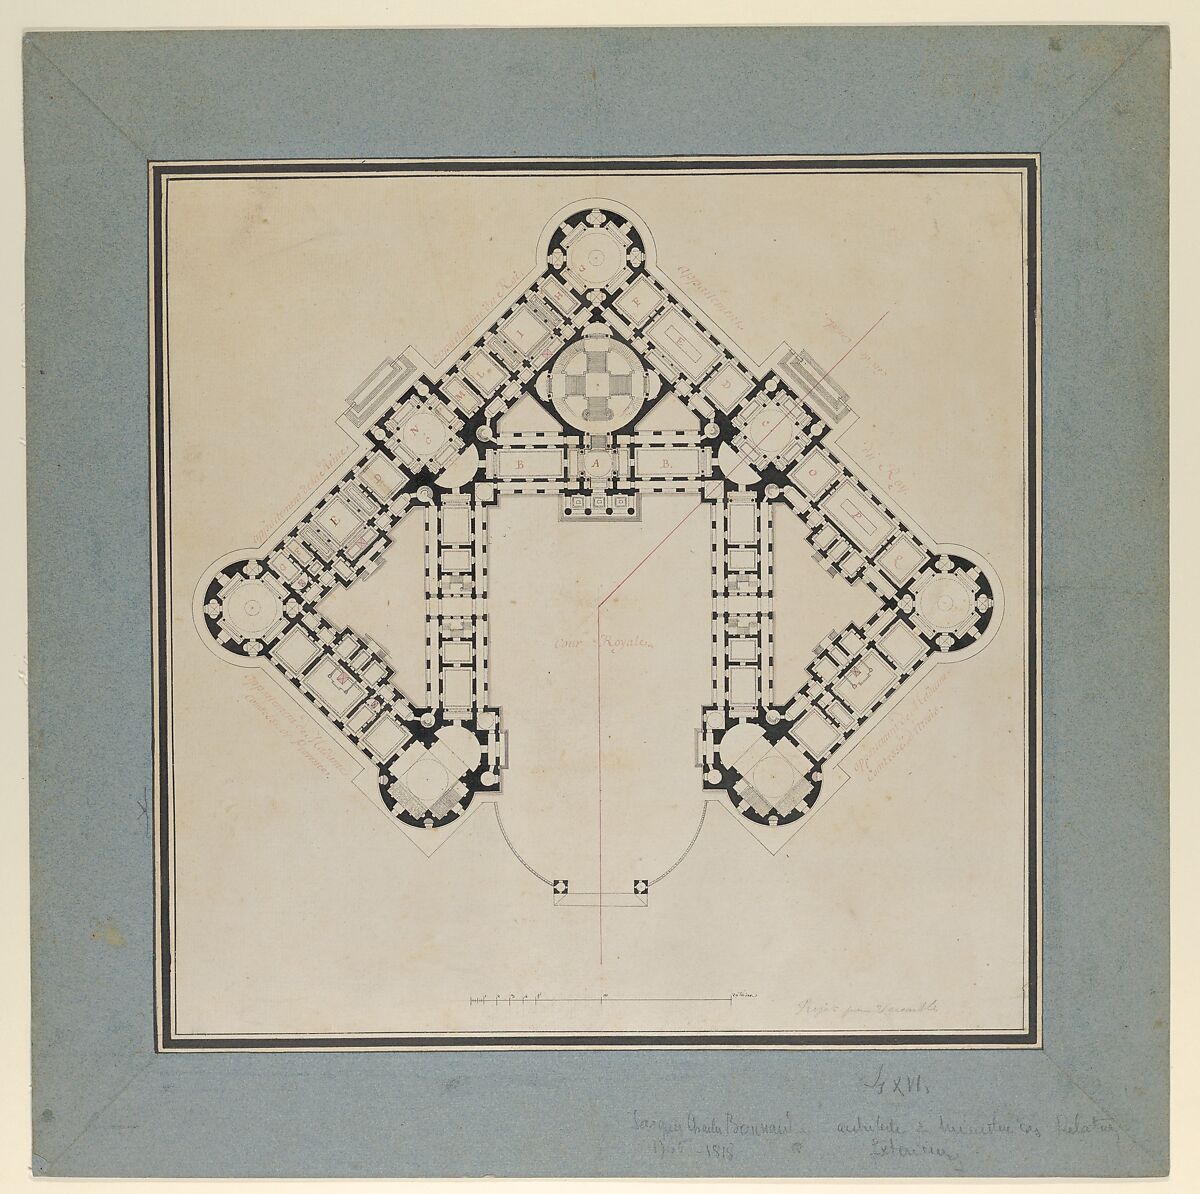 Floor Plan for the Renovations of the Château de Rambouillet, Jean Augustin Renard  French, Pen and black ink, brush and pink, black, and gray wash